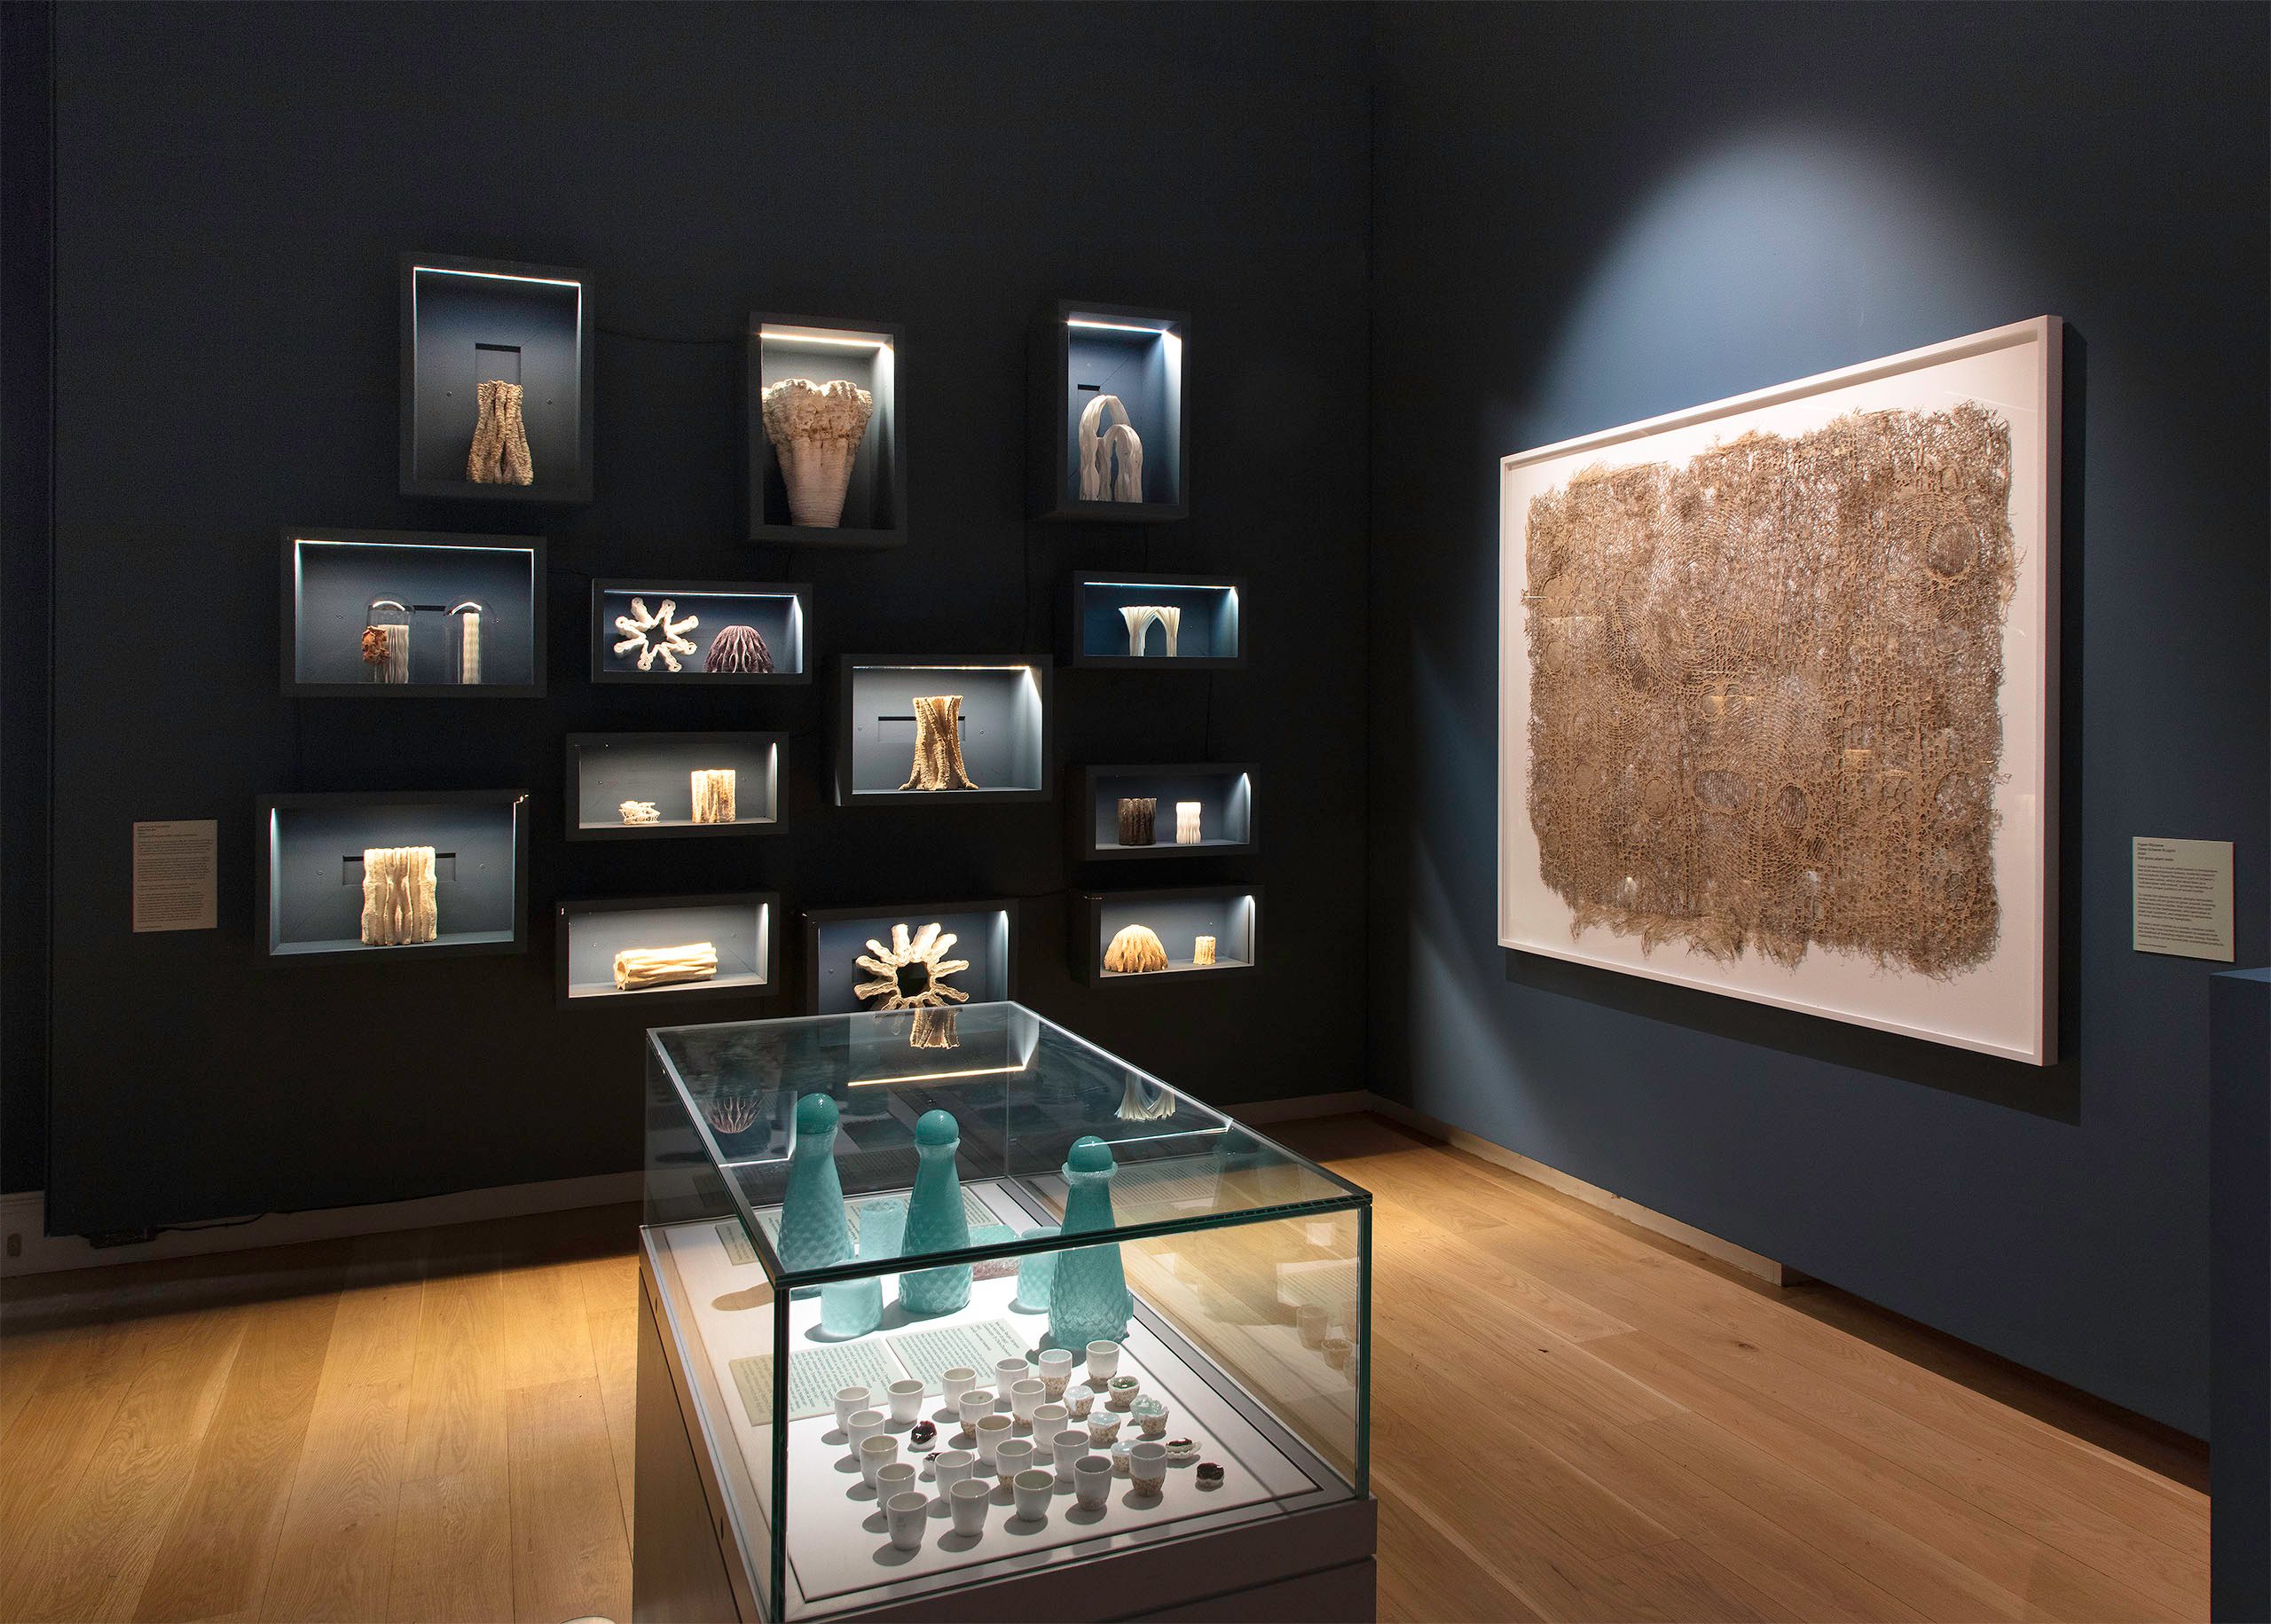 A museum exhibition showcasing various archaeological artifacts and textile pieces displayed in illuminated cases and on the walls. The exhibits appear to be ancient relics, textile fragments, and ceramics, presented in a dimly lit gallery space.